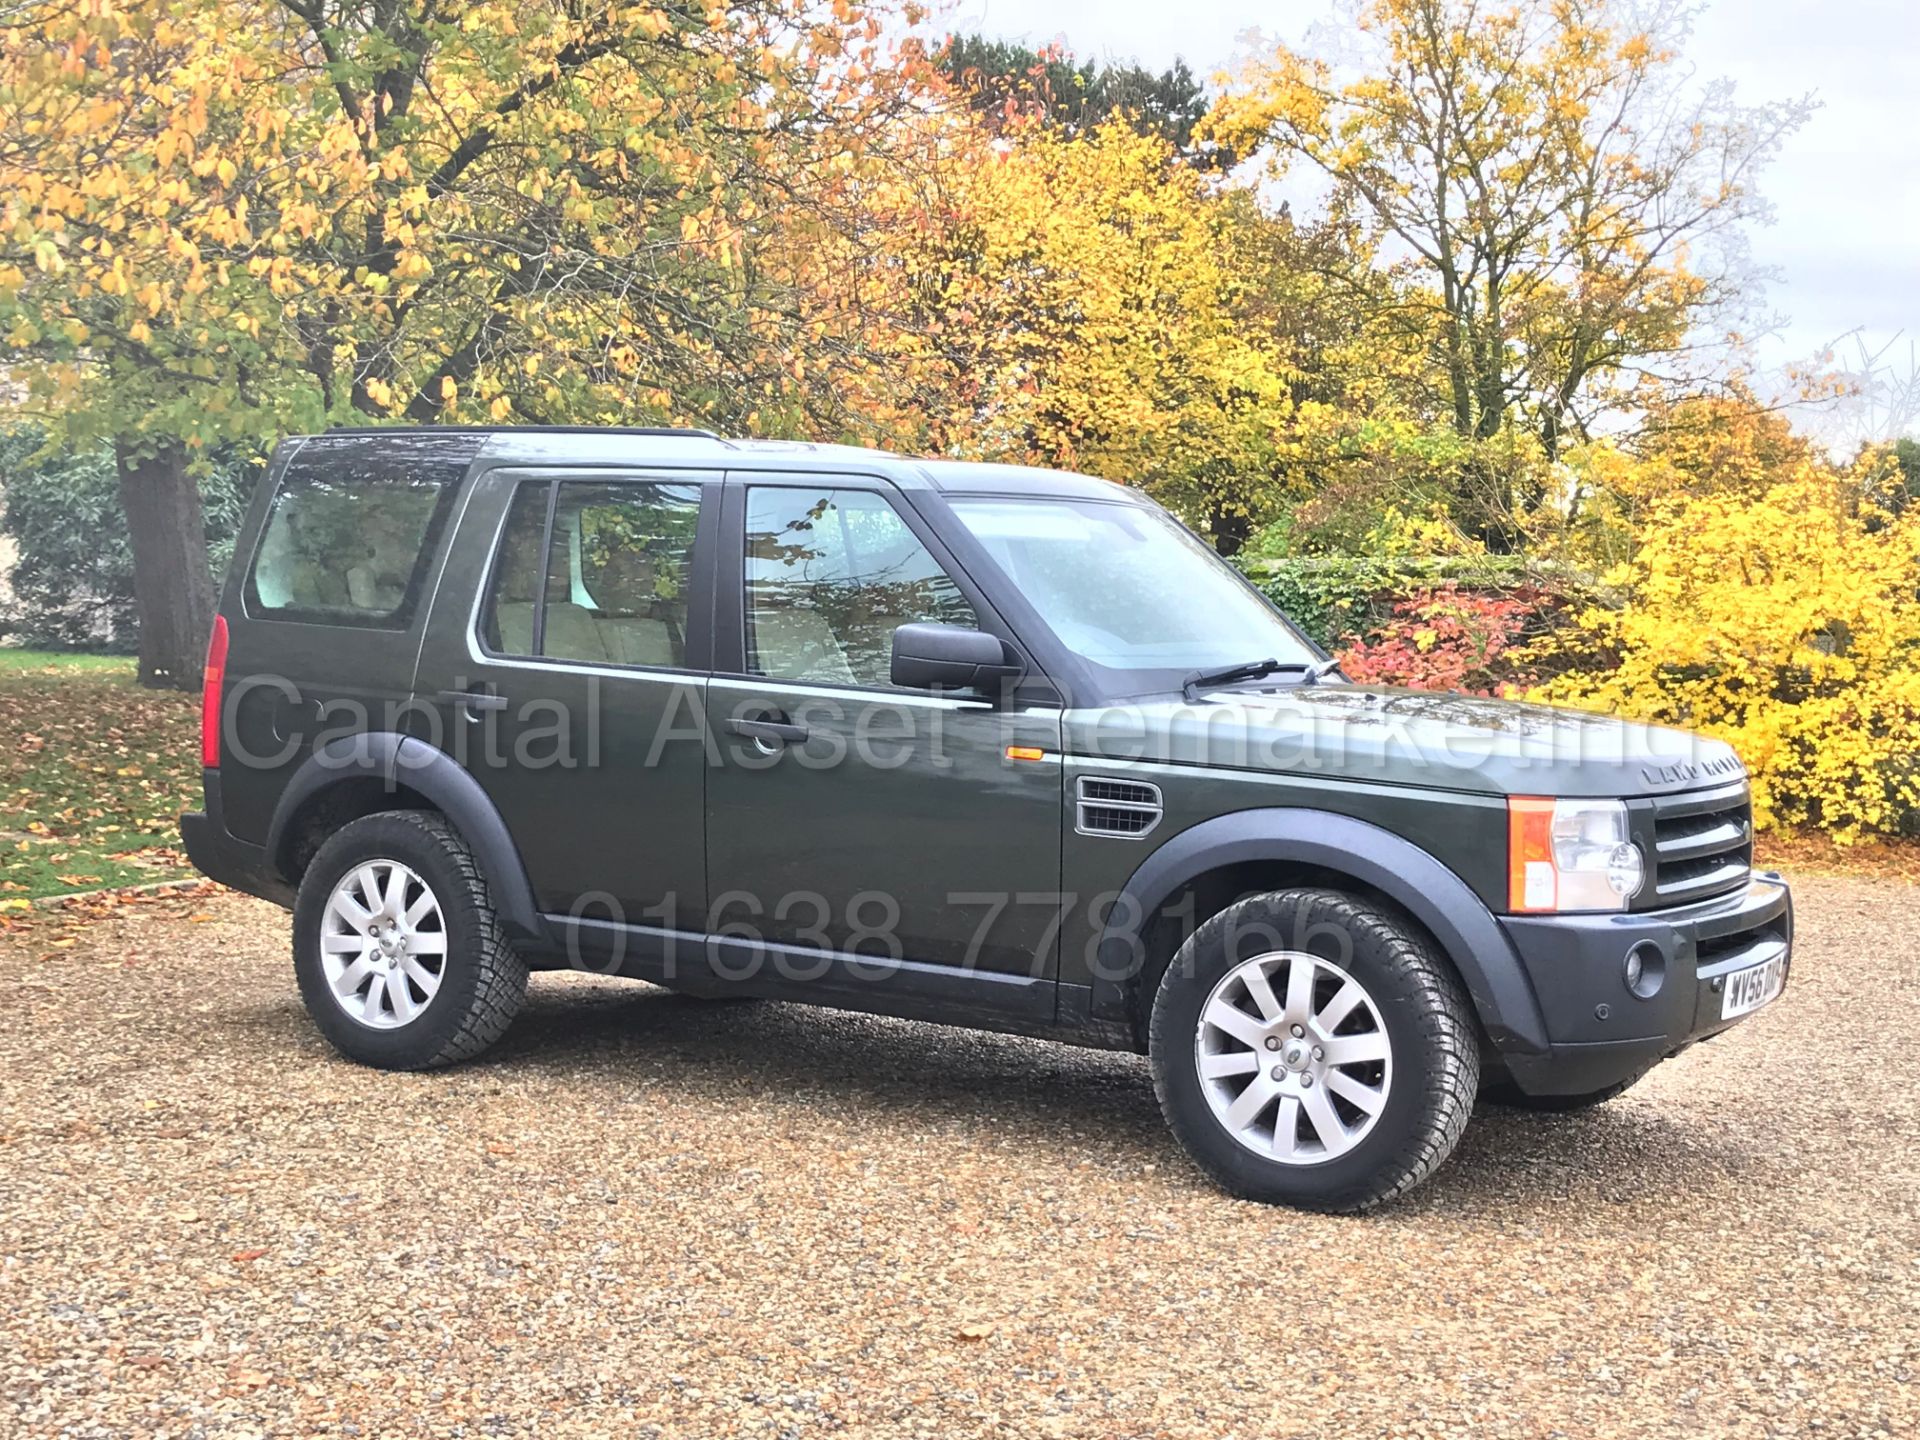 LAND ROVER DISCOVERY 3 SE (2007 MODEL) 'TDV6 - AUTO - LEATHER - SAT NAV - 7 SEATER' *MASSIVE SPEC* - Image 10 of 36